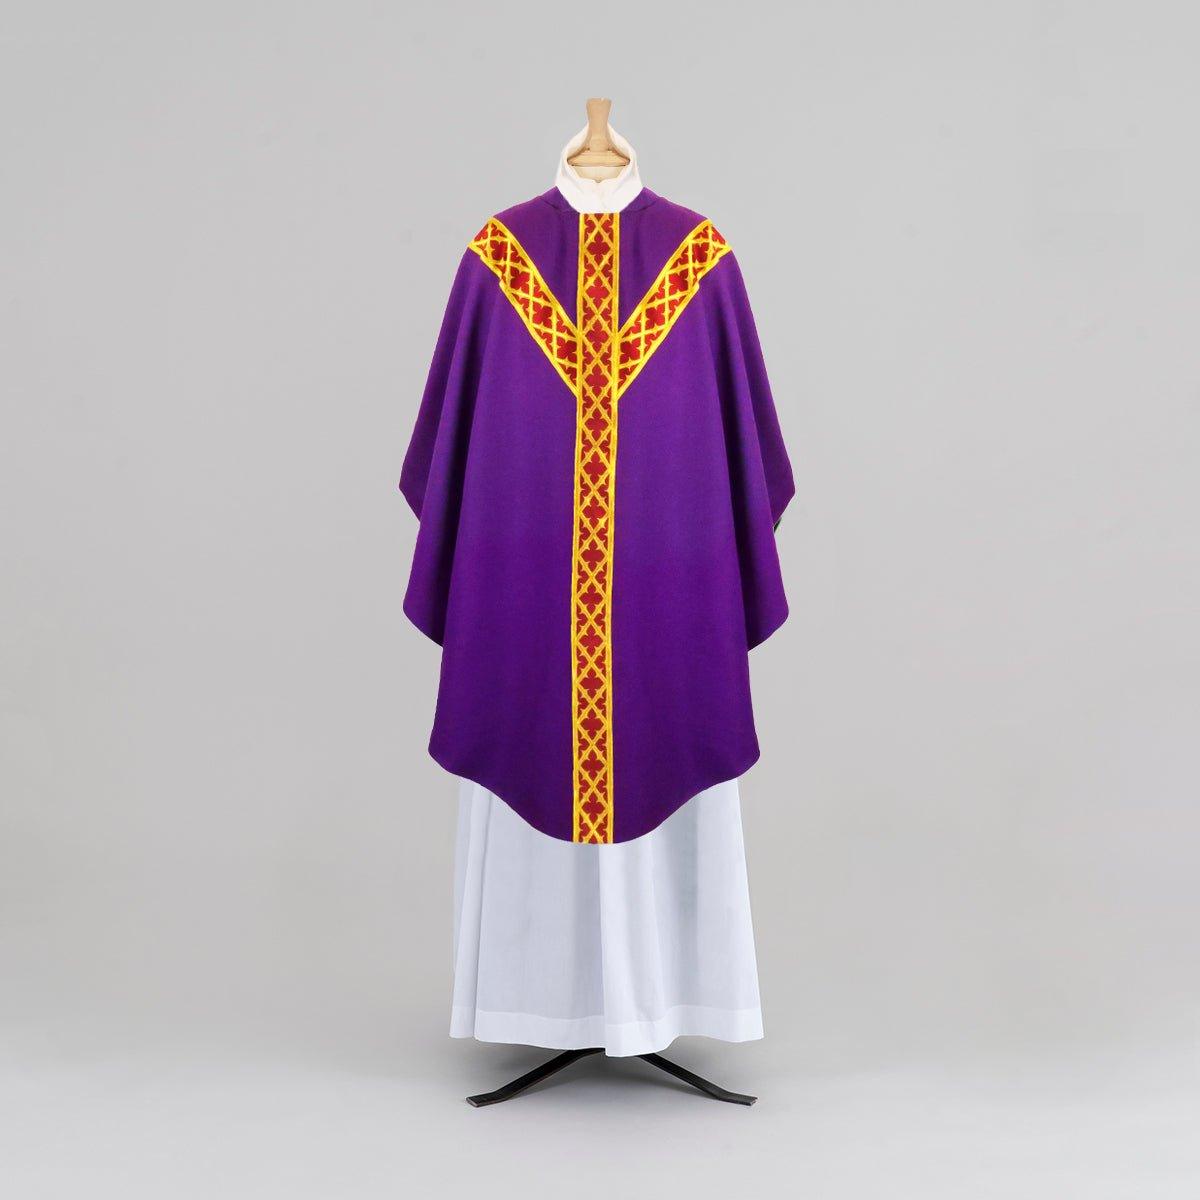 St Francis Chasuble - Watts & Co.